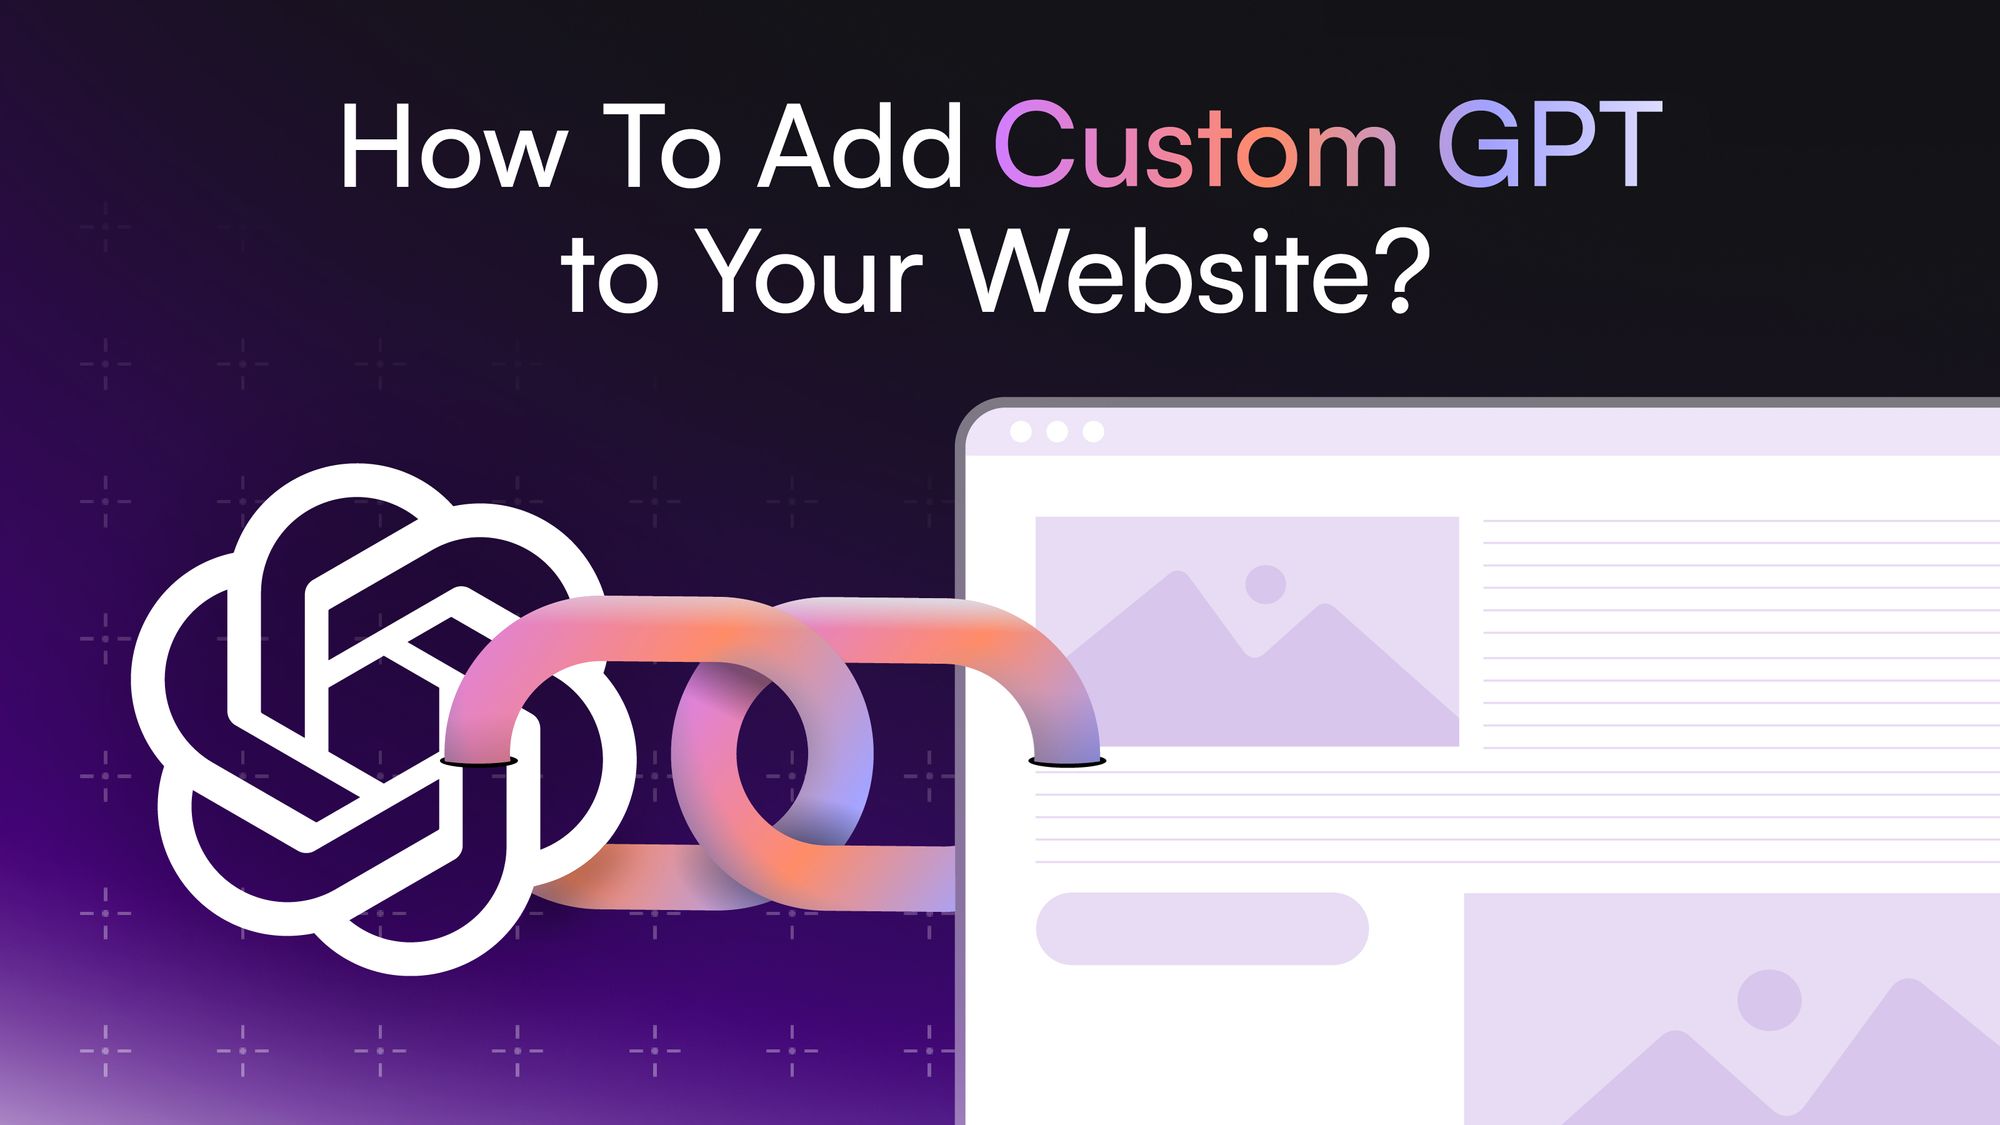 How To Add Custom GPT to Your Website in Minutes